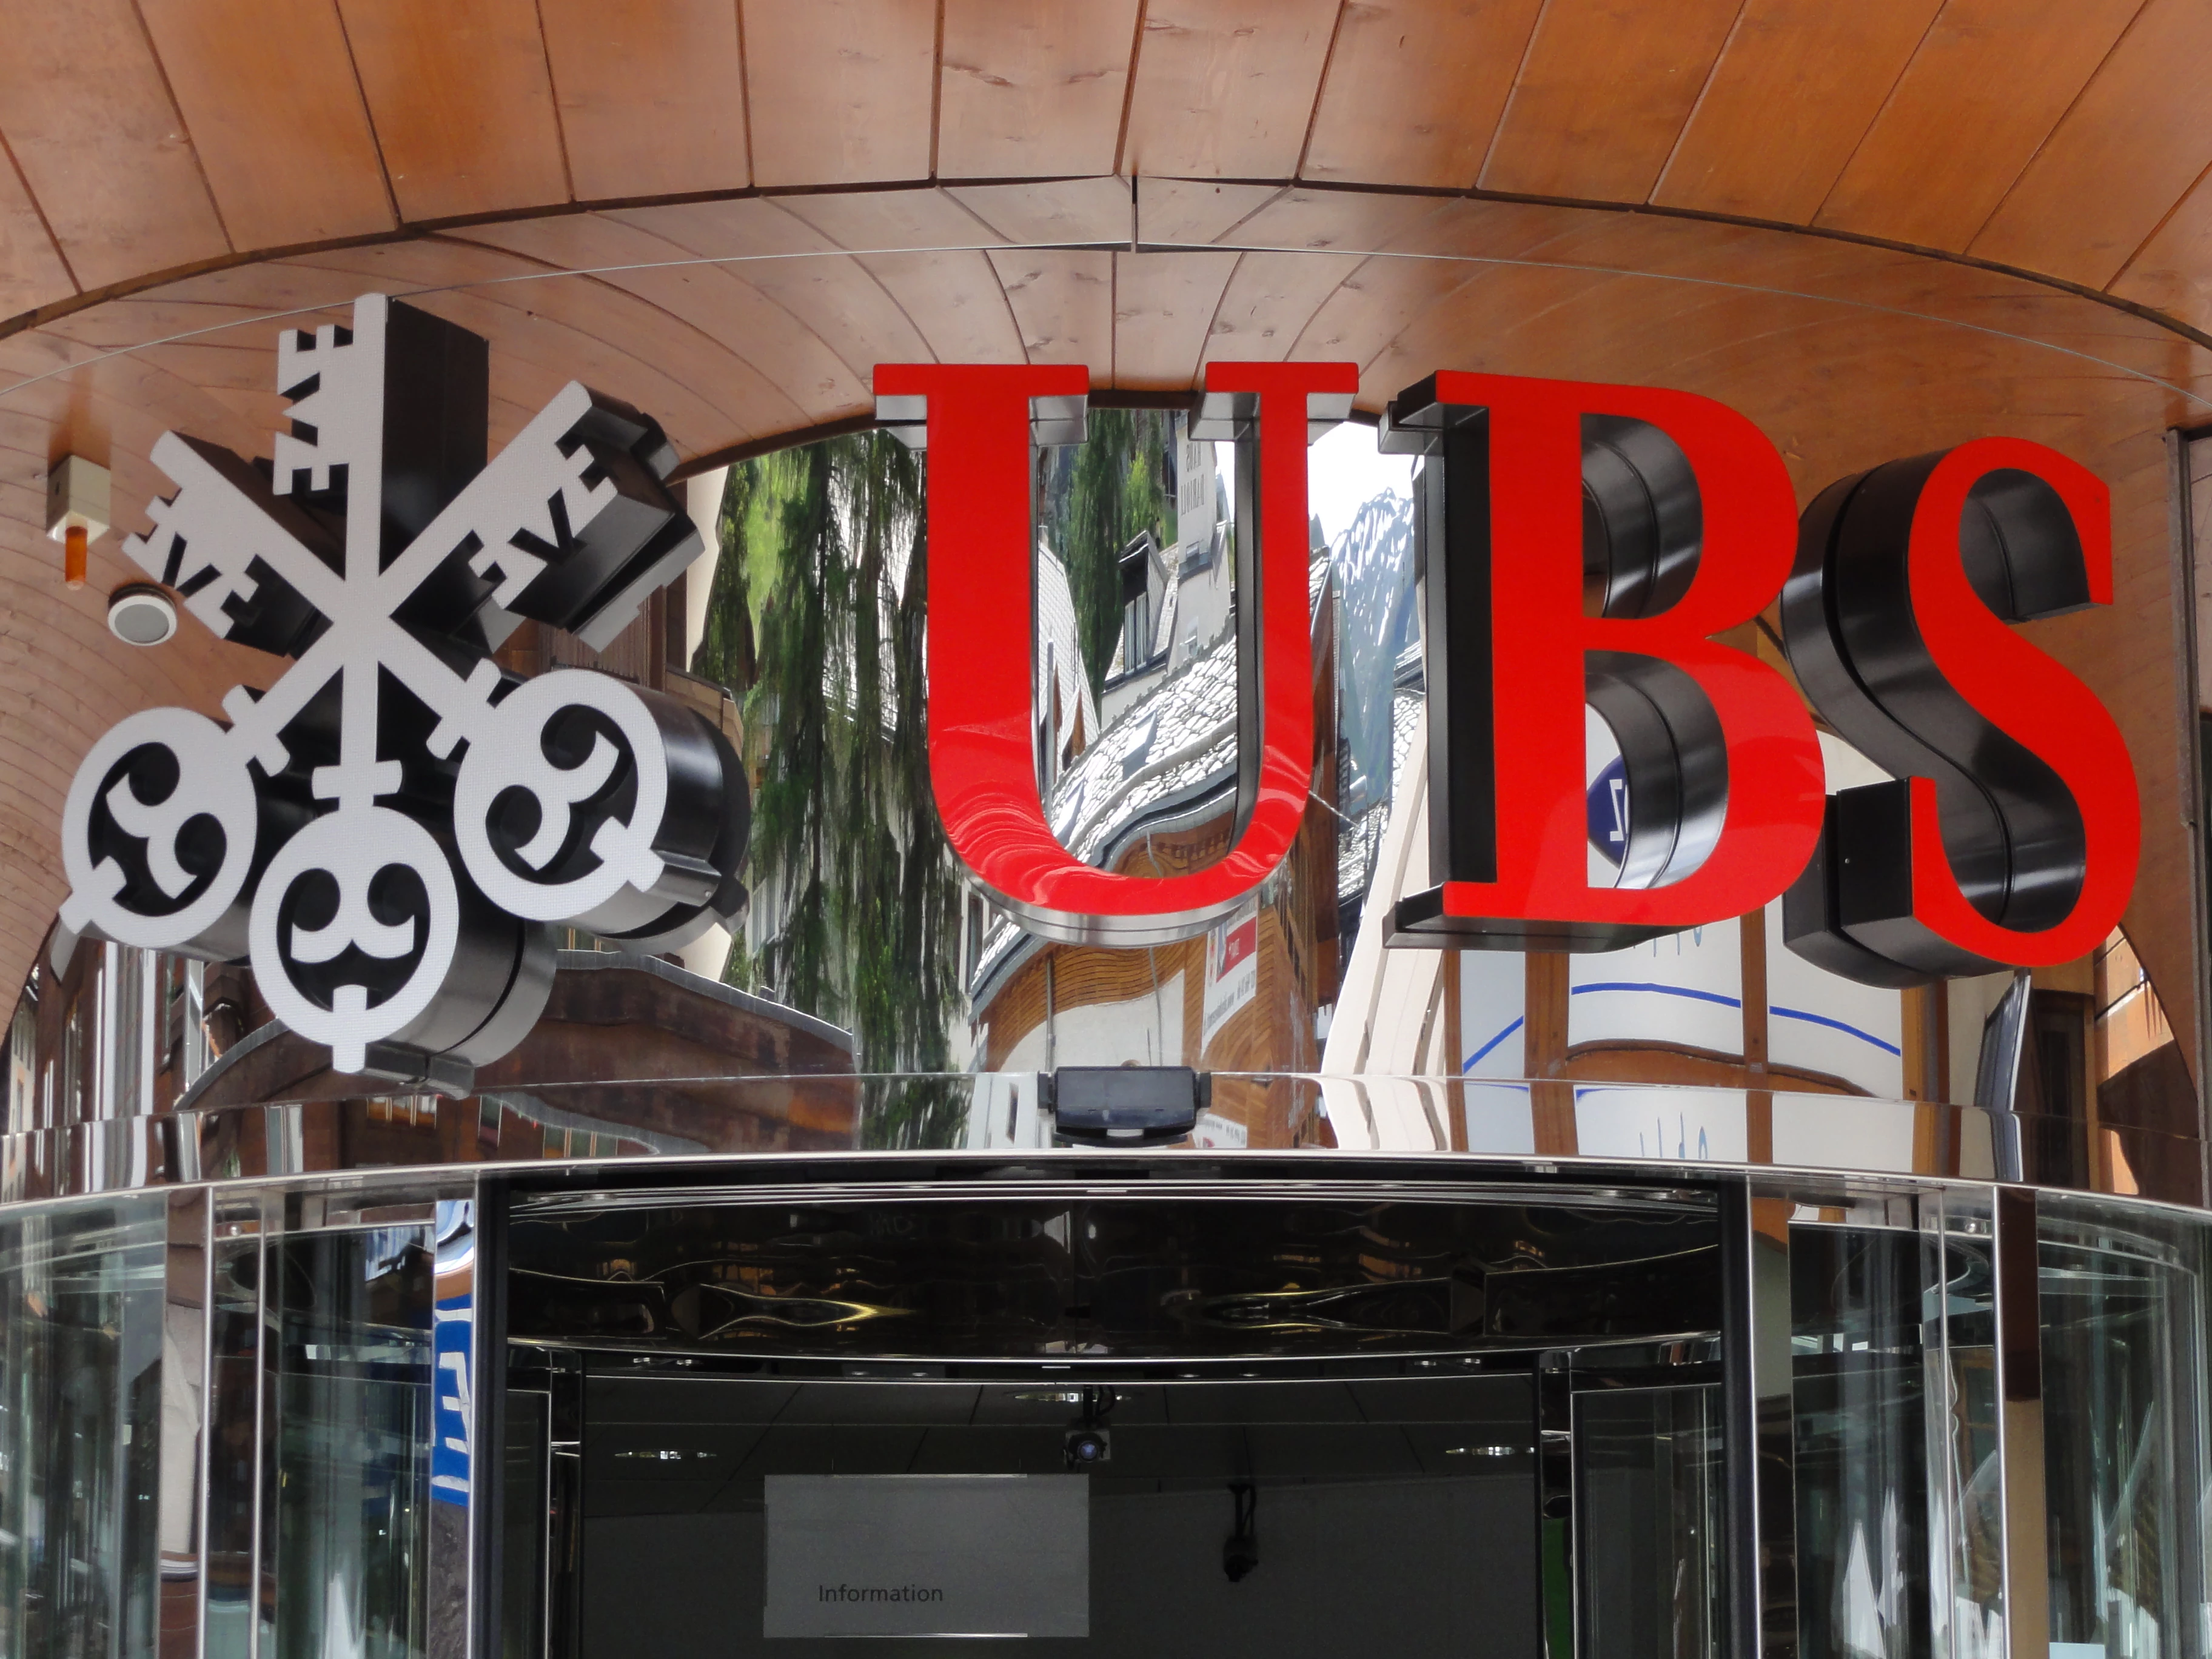 Three more big banks have joined UBS's digital cash initiative.